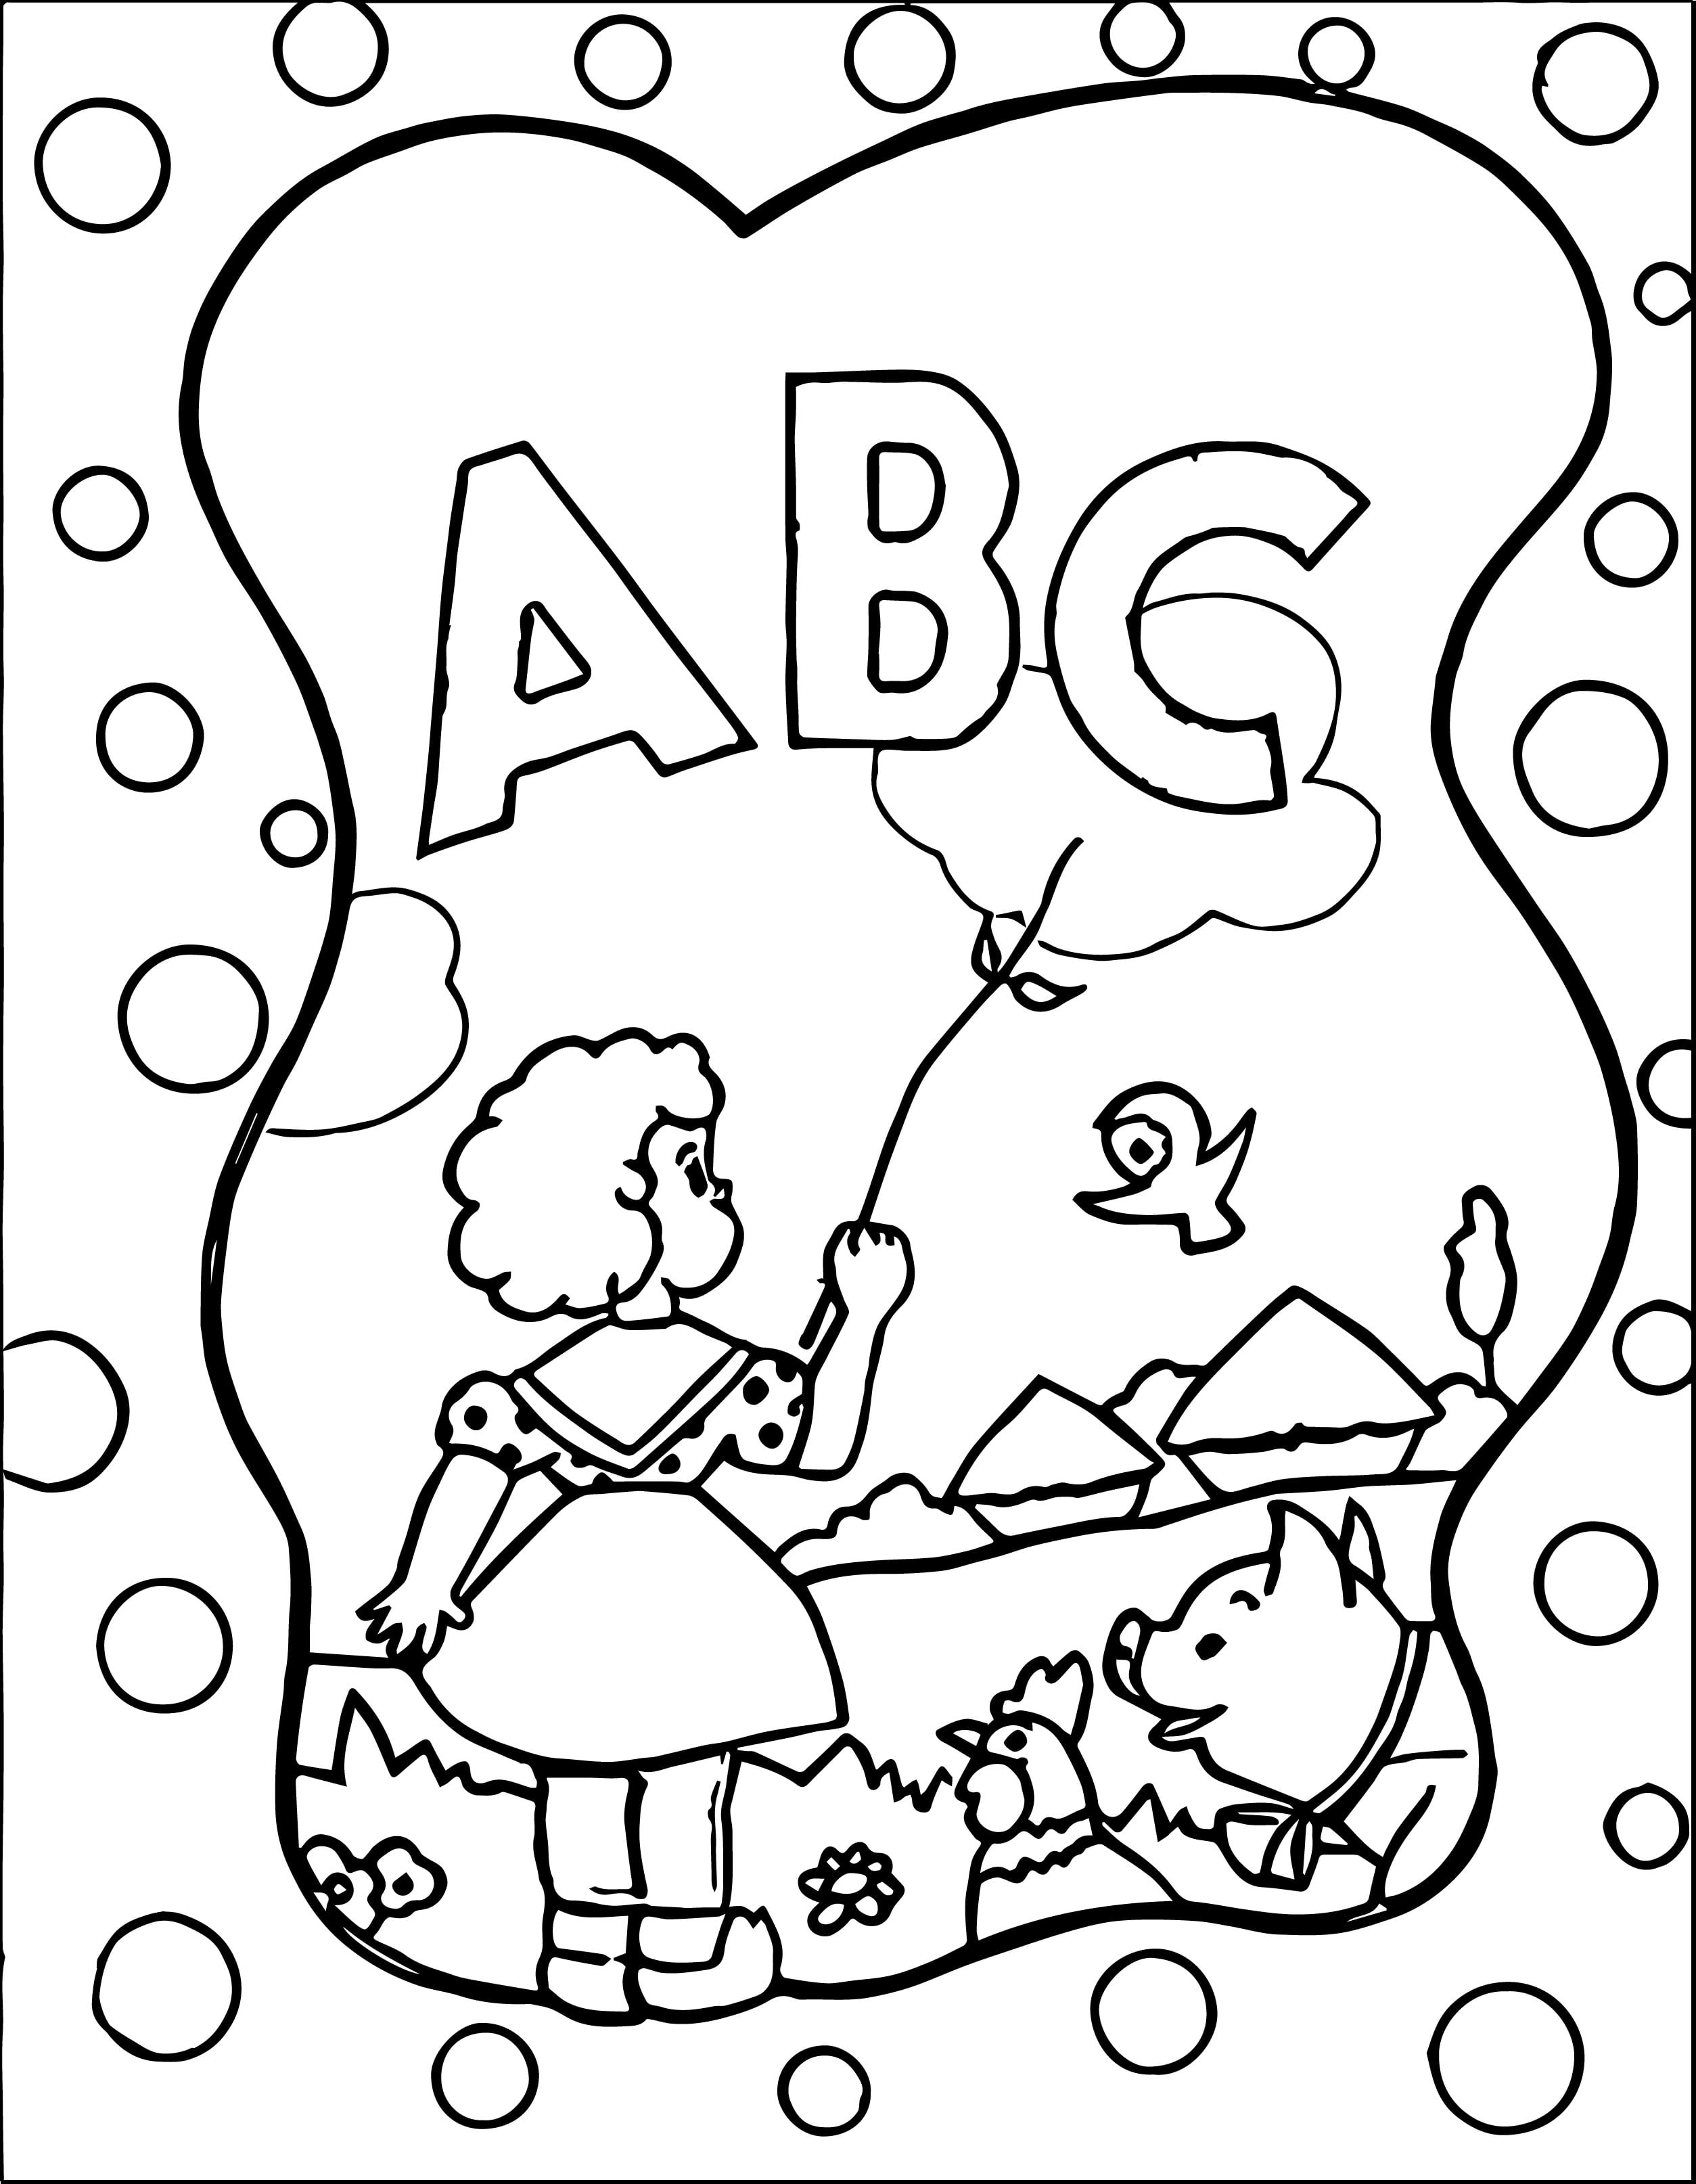 Abc Animal Coloring Pages Wecoloringpage